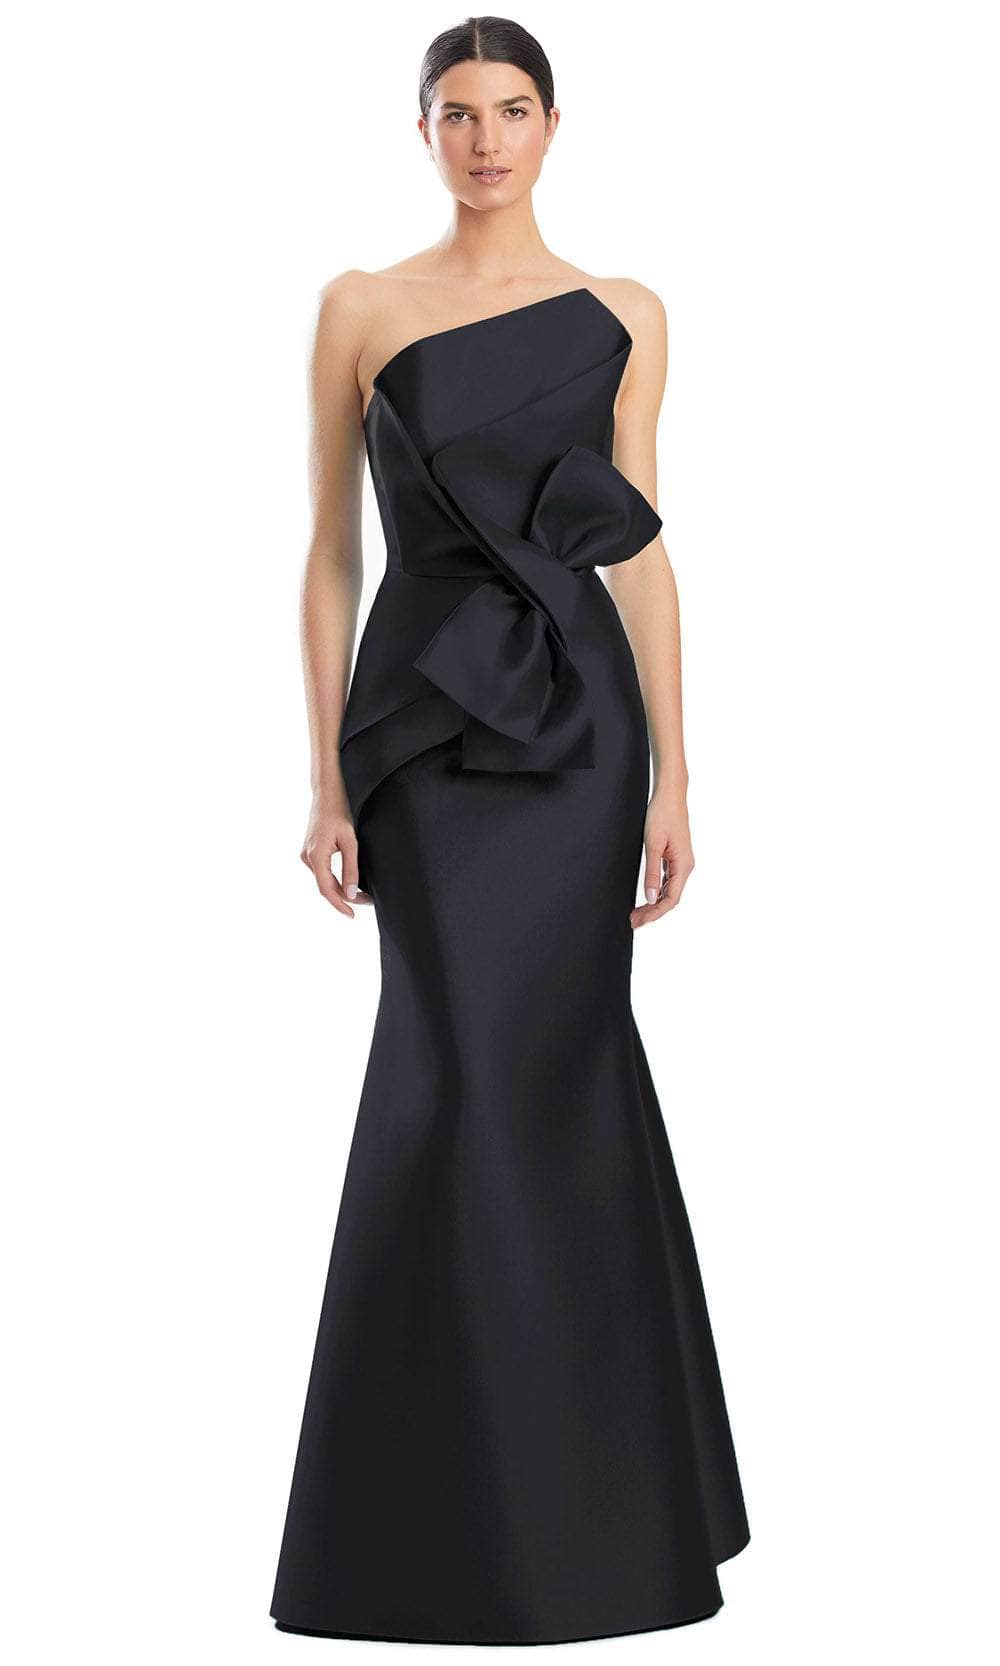 Image of Alexander by Daymor 1952S24 - Strapless Bow Accented Prom Gown